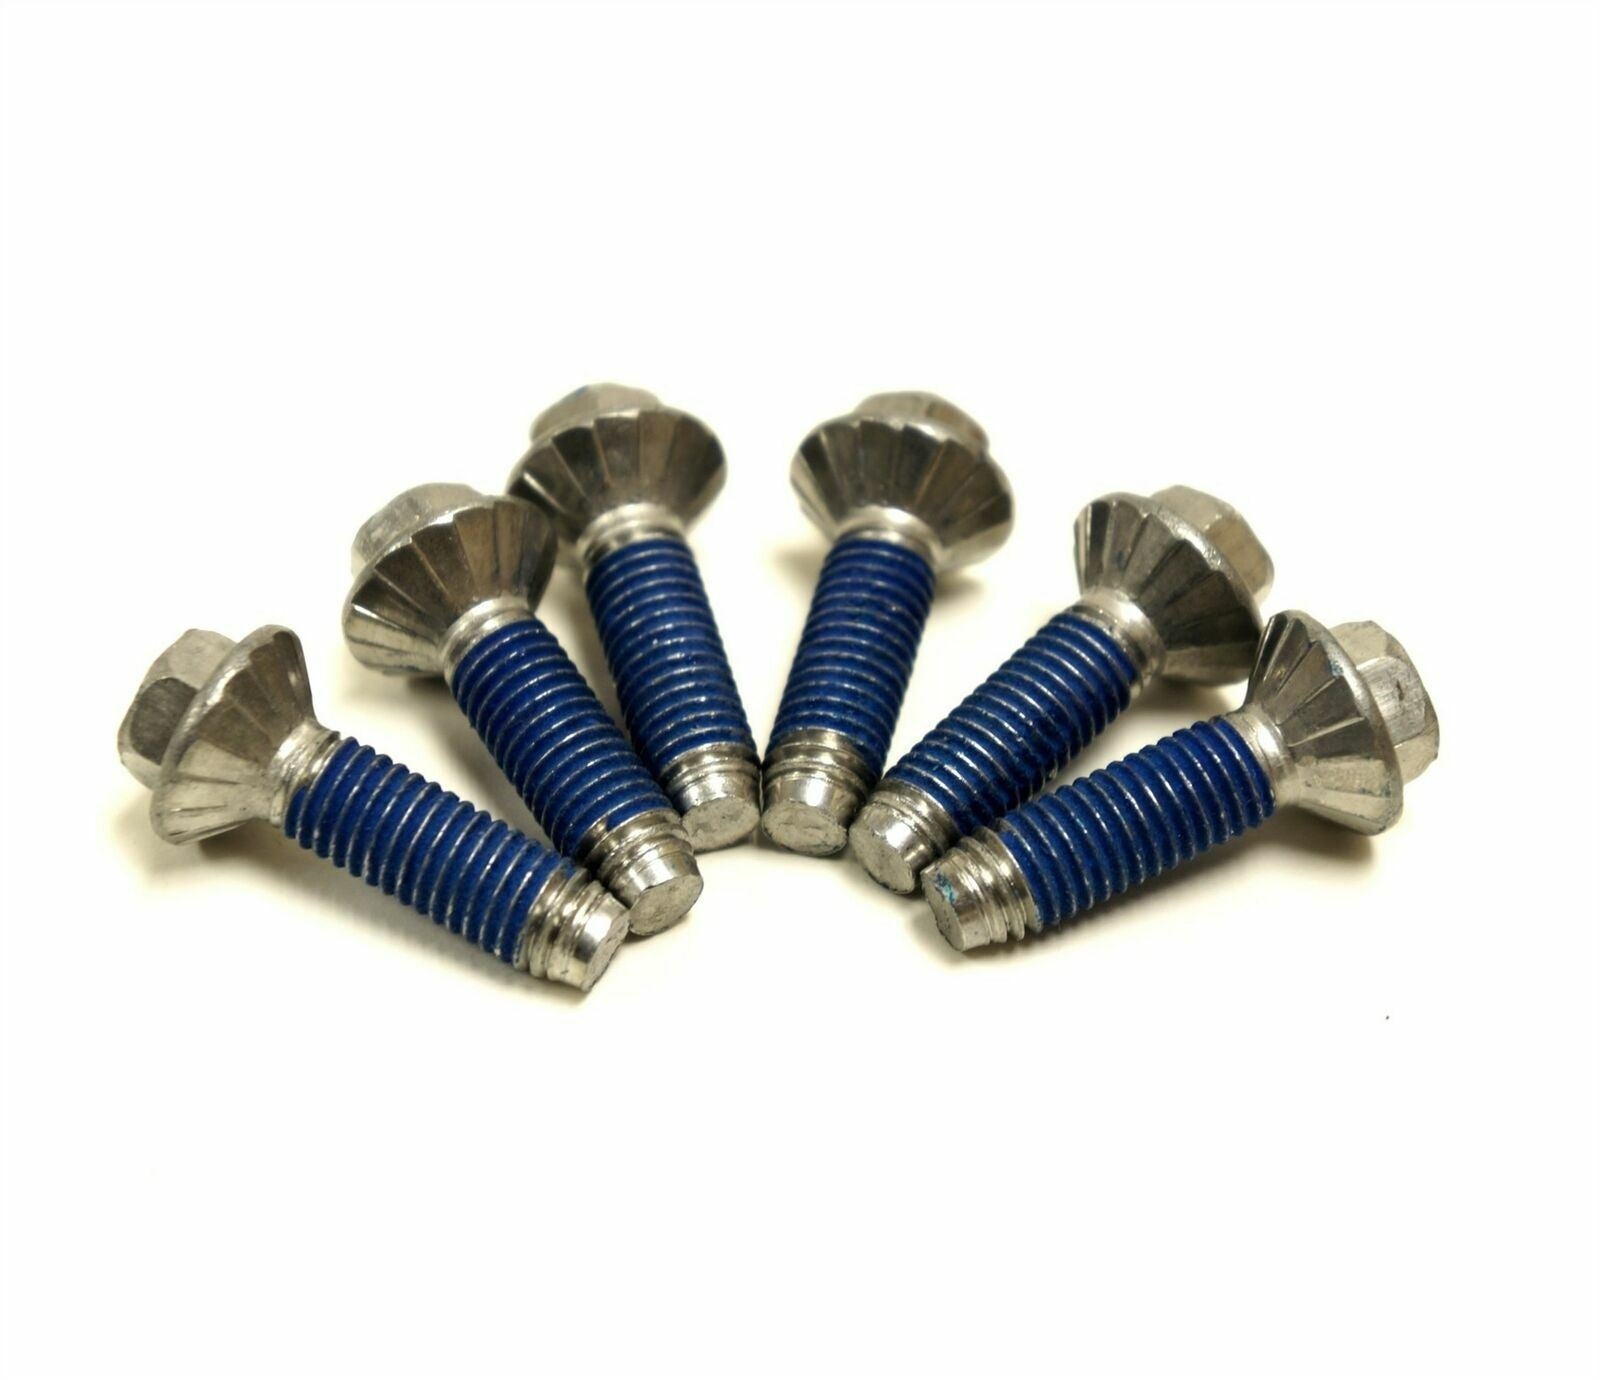 New OEM Genuine 6 Pack Samsung DC60-40137A Spider Hex Bolts (6 Pcs)